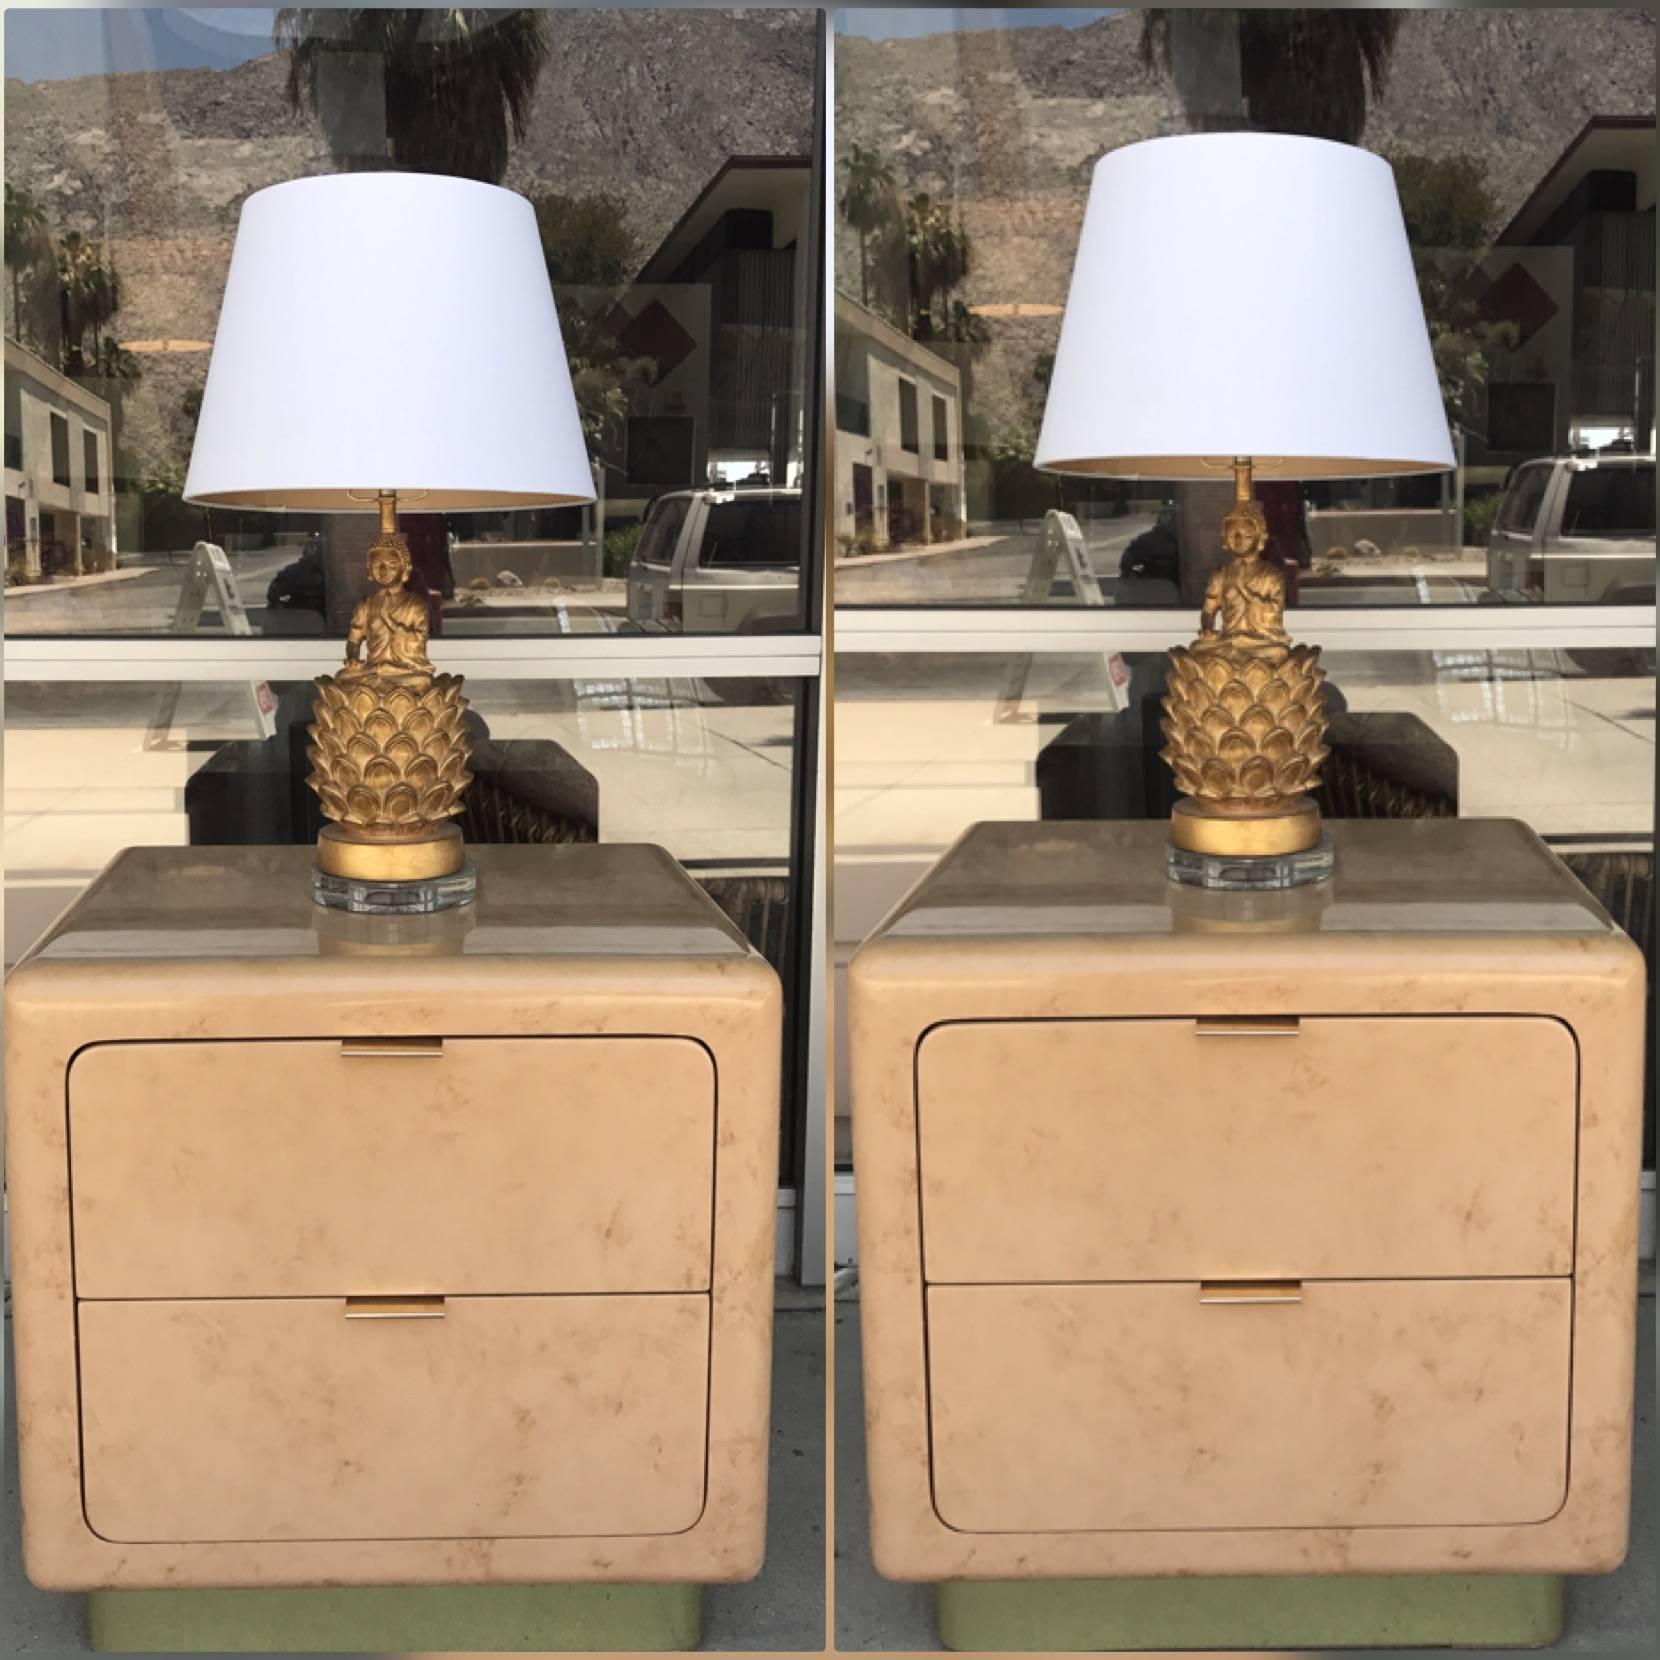 These very high end night stands came from a very glamorous Palm Springs area Country Club residence. Very much in the style of the late, great designer, Steve Chase. The entire bedroom suite was custom made and available separately. Two drawers